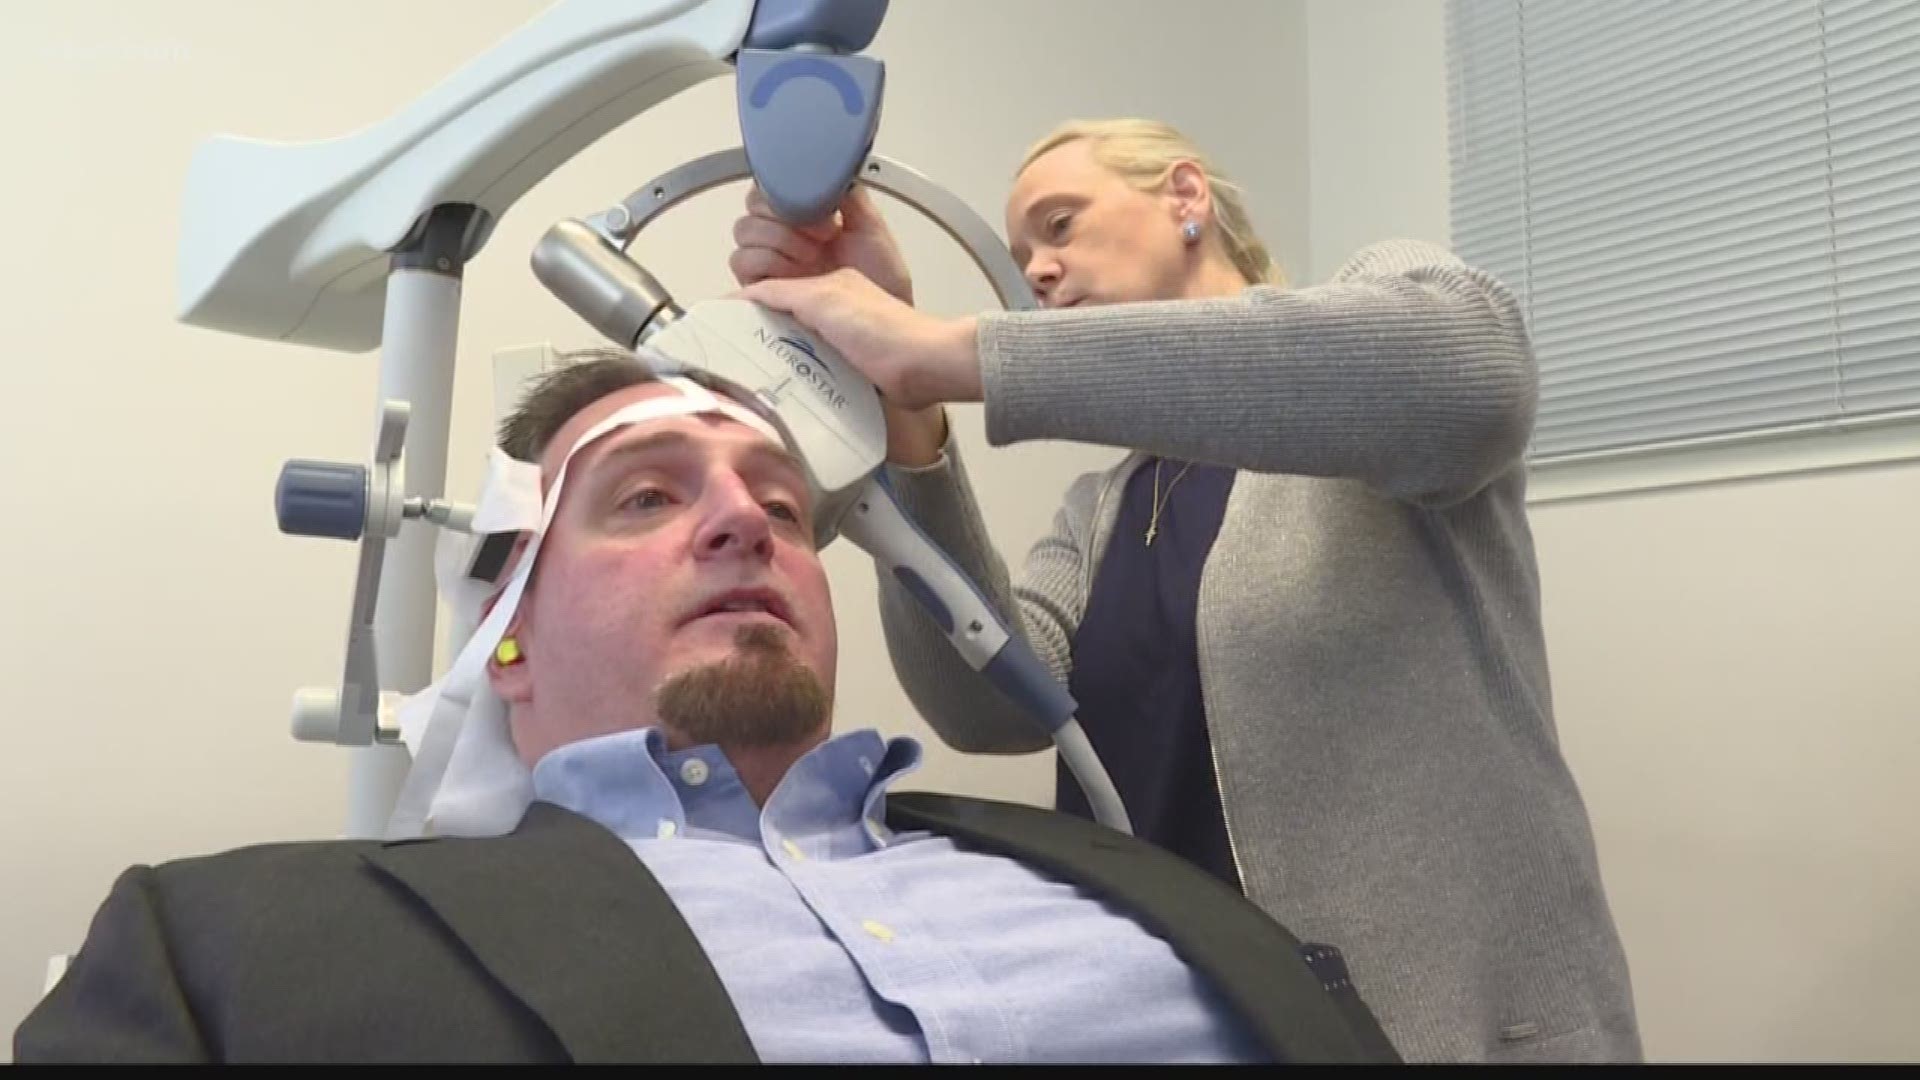 Transcranial Magnetic Stimulation (TMS) is a non-invasive, non-medication therapy showing promising results in helping treat depression.